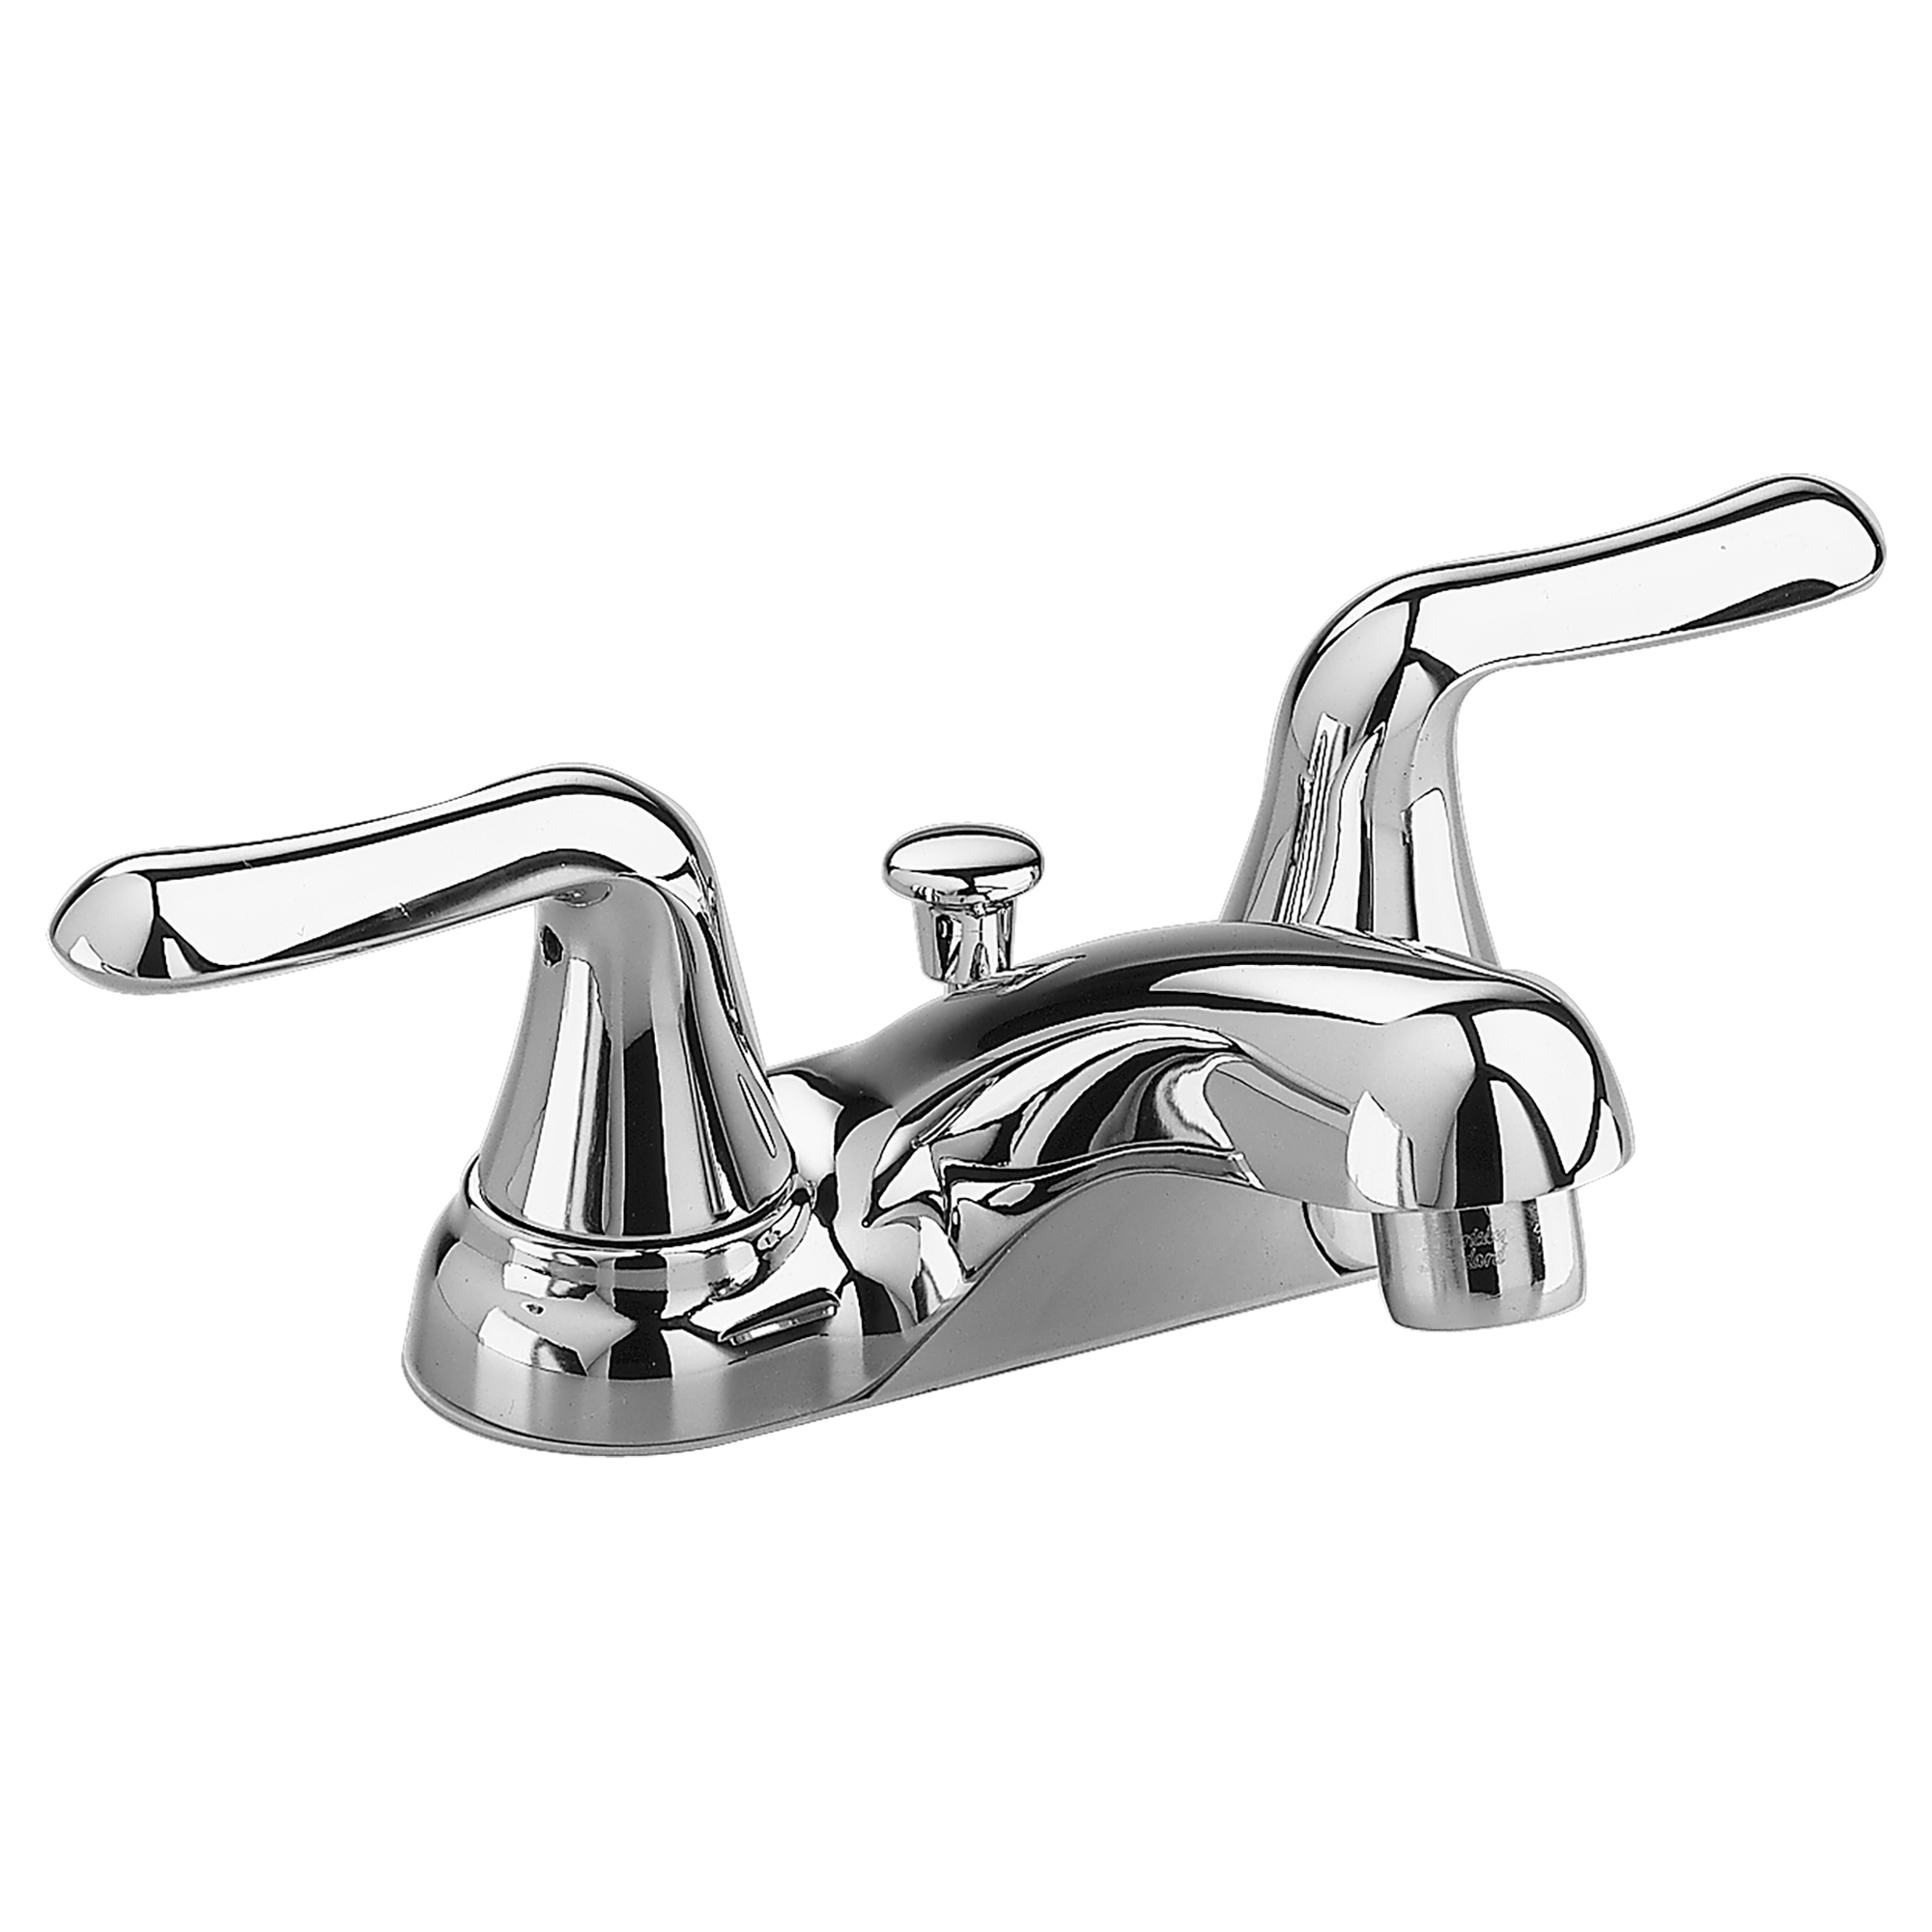 Colony® Soft 4-Inch Centerset 2-Handle Bathroom Faucet 1.2 gpm/4.5 L/min With Lever Handles